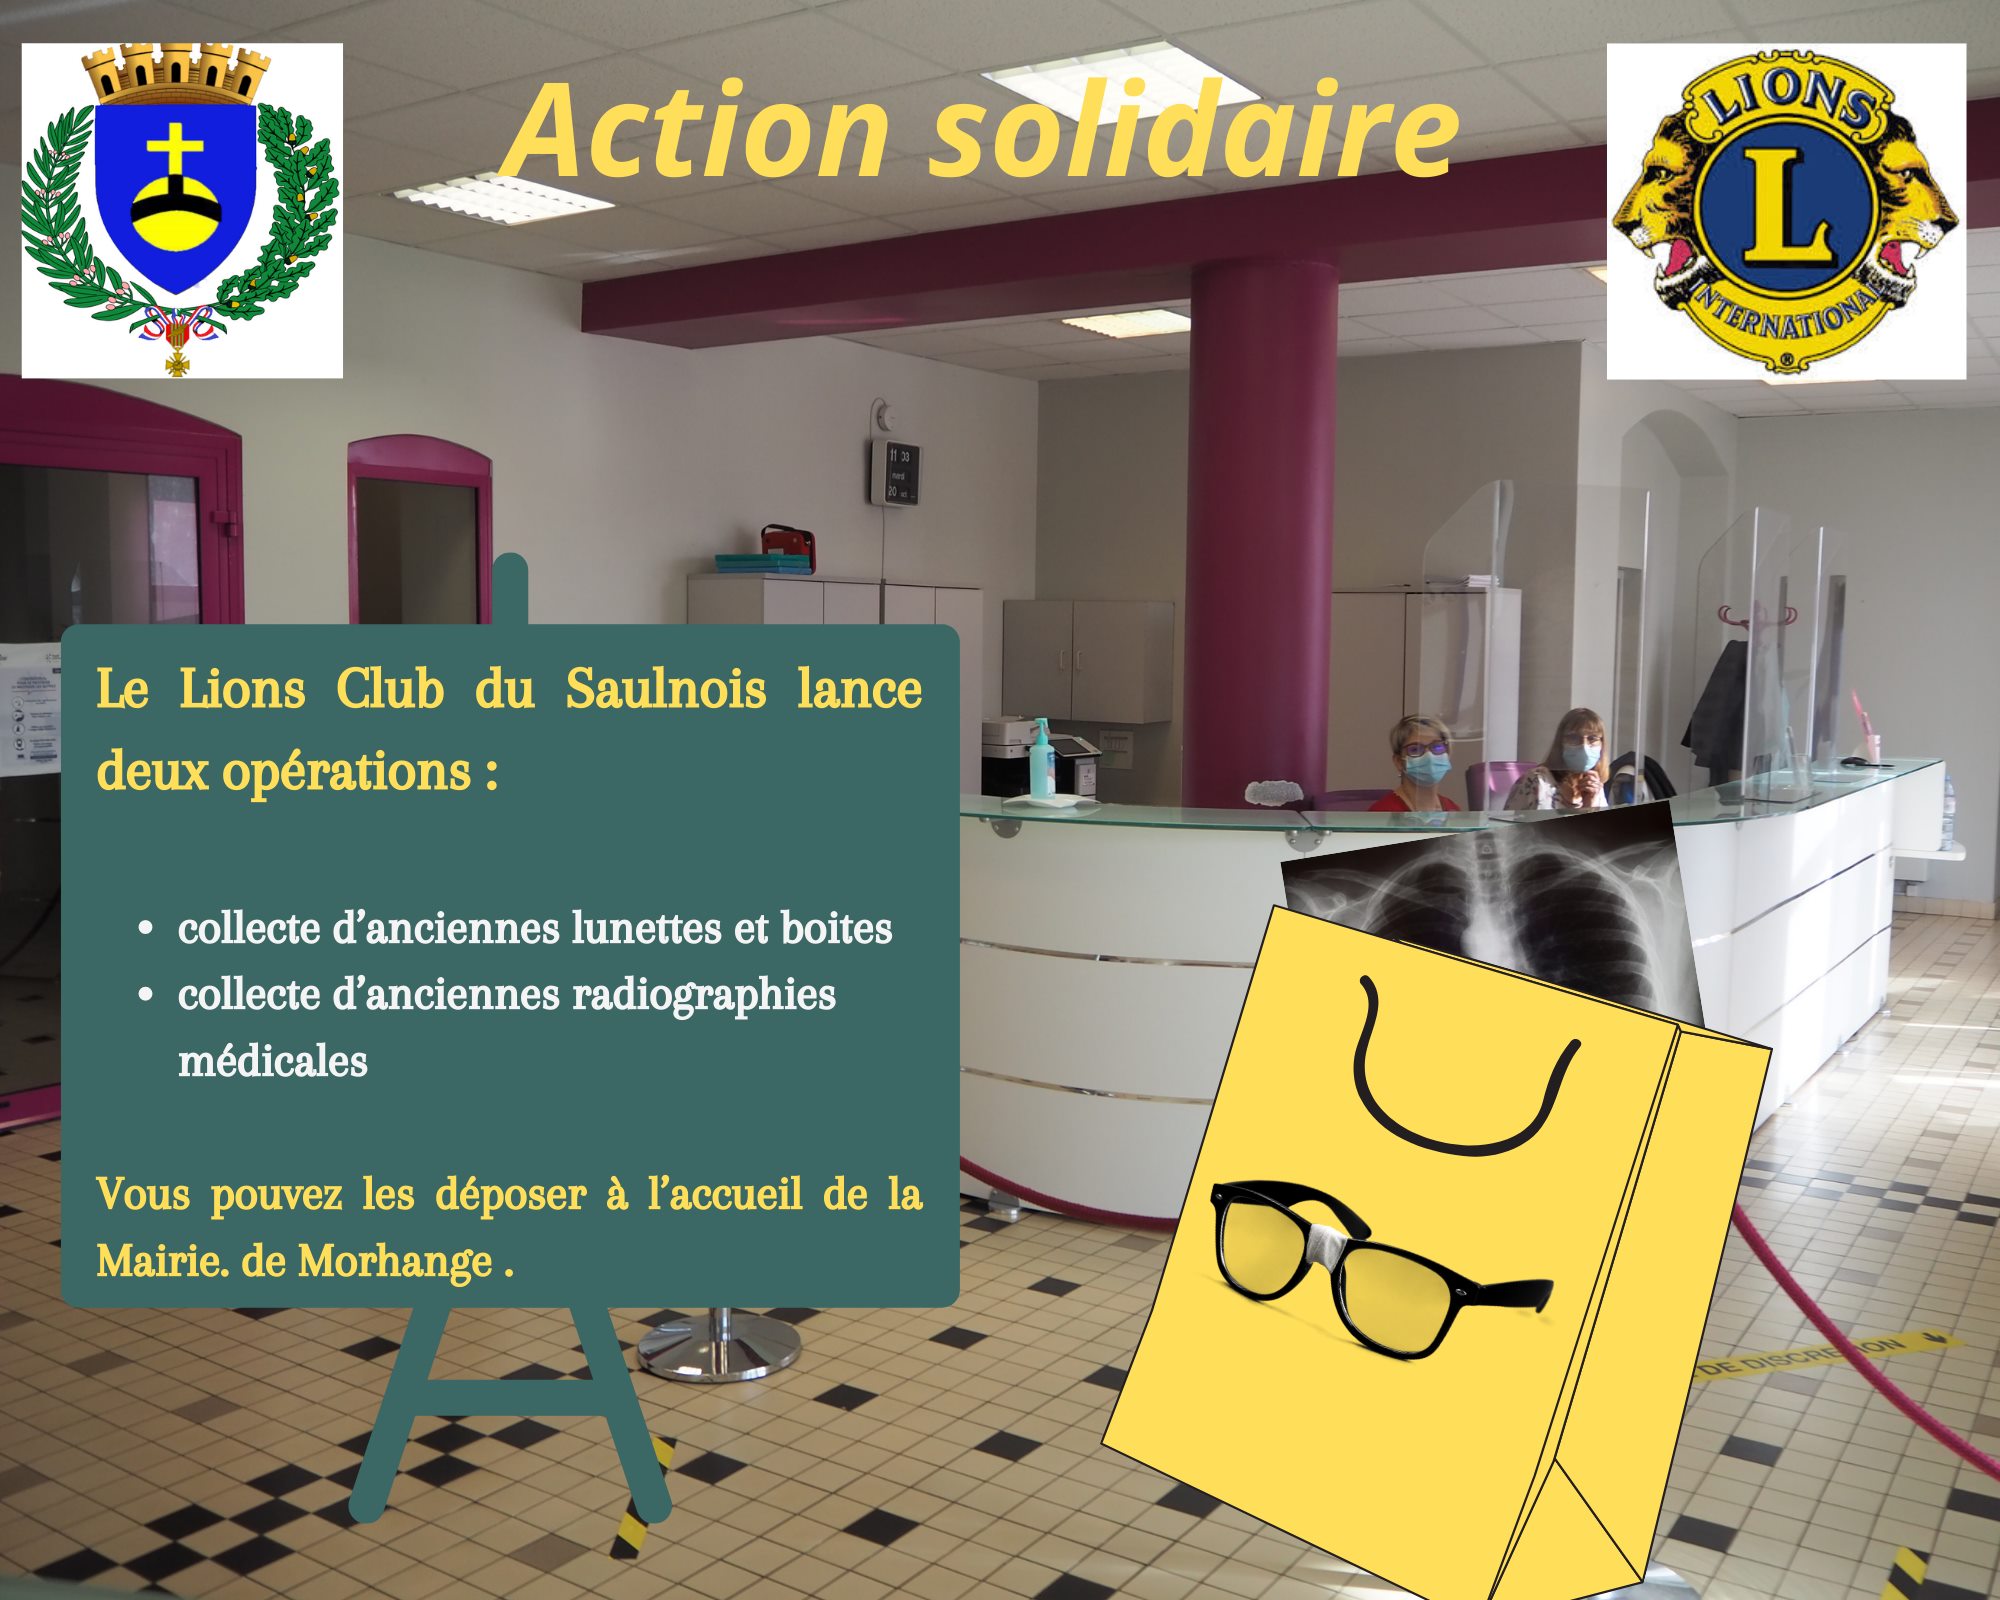 Action solidaire